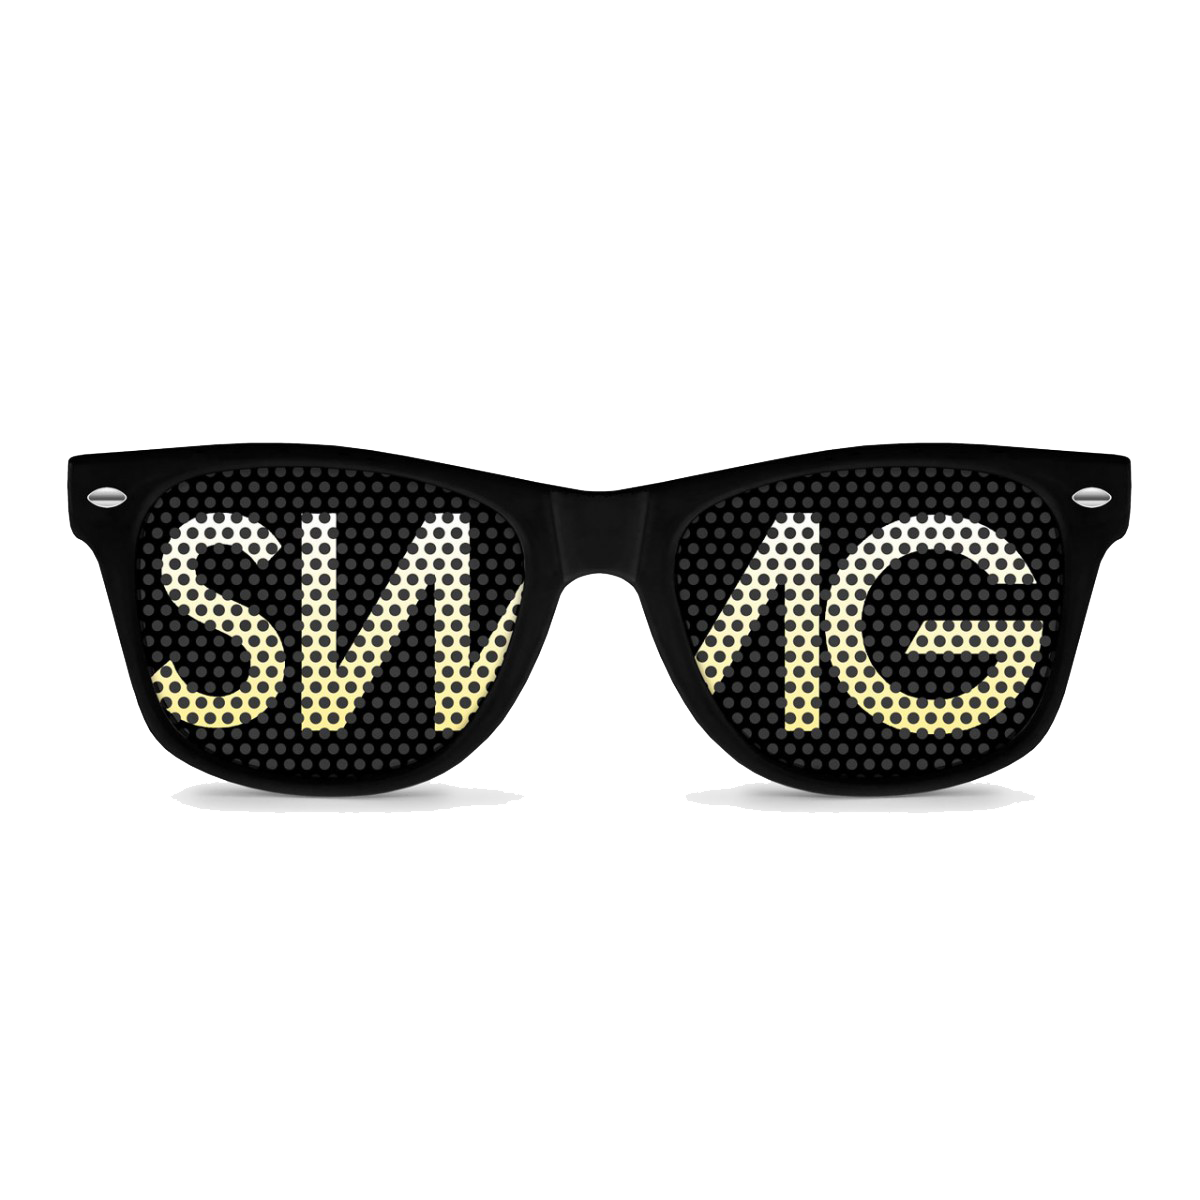  Aviator sunglasses Eyewear - Thug Life png download - 1200*1200  - Free Transparent Amazoncom png Download. - Clip Art Library